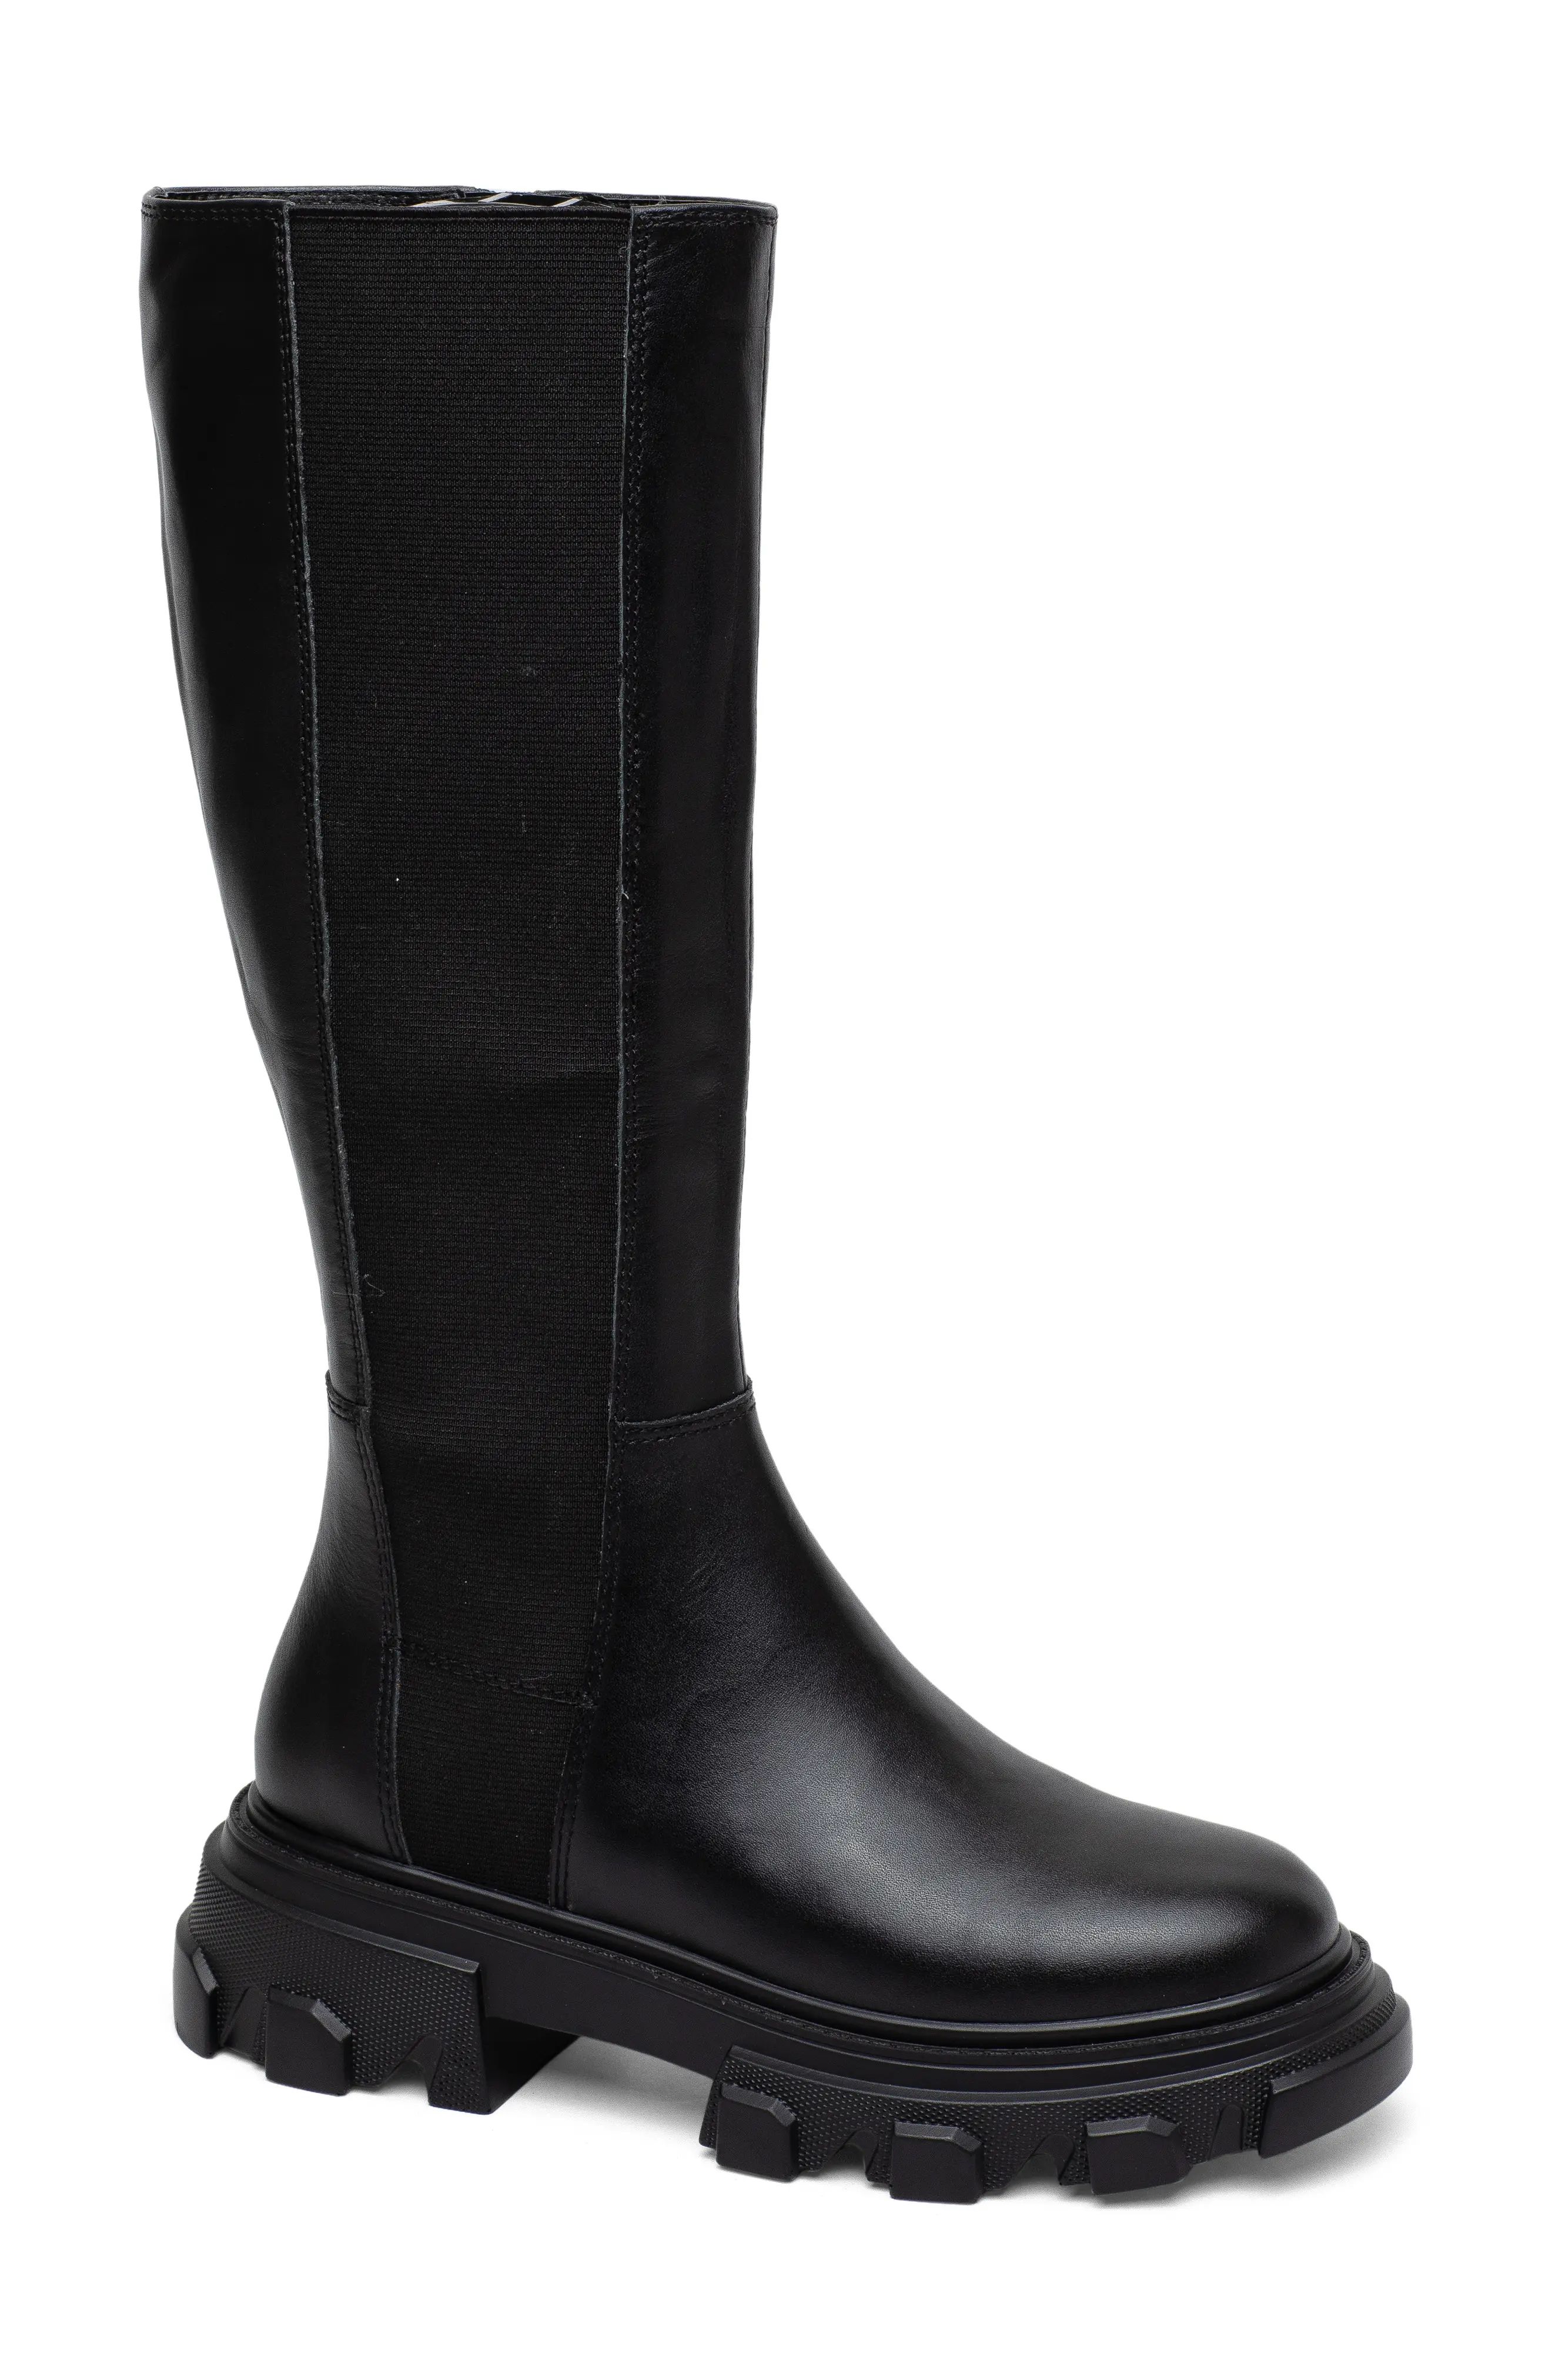 Lisa Vicky Declare Knee High Boot in Black at Nordstrom, Size 9.5 | Nordstrom